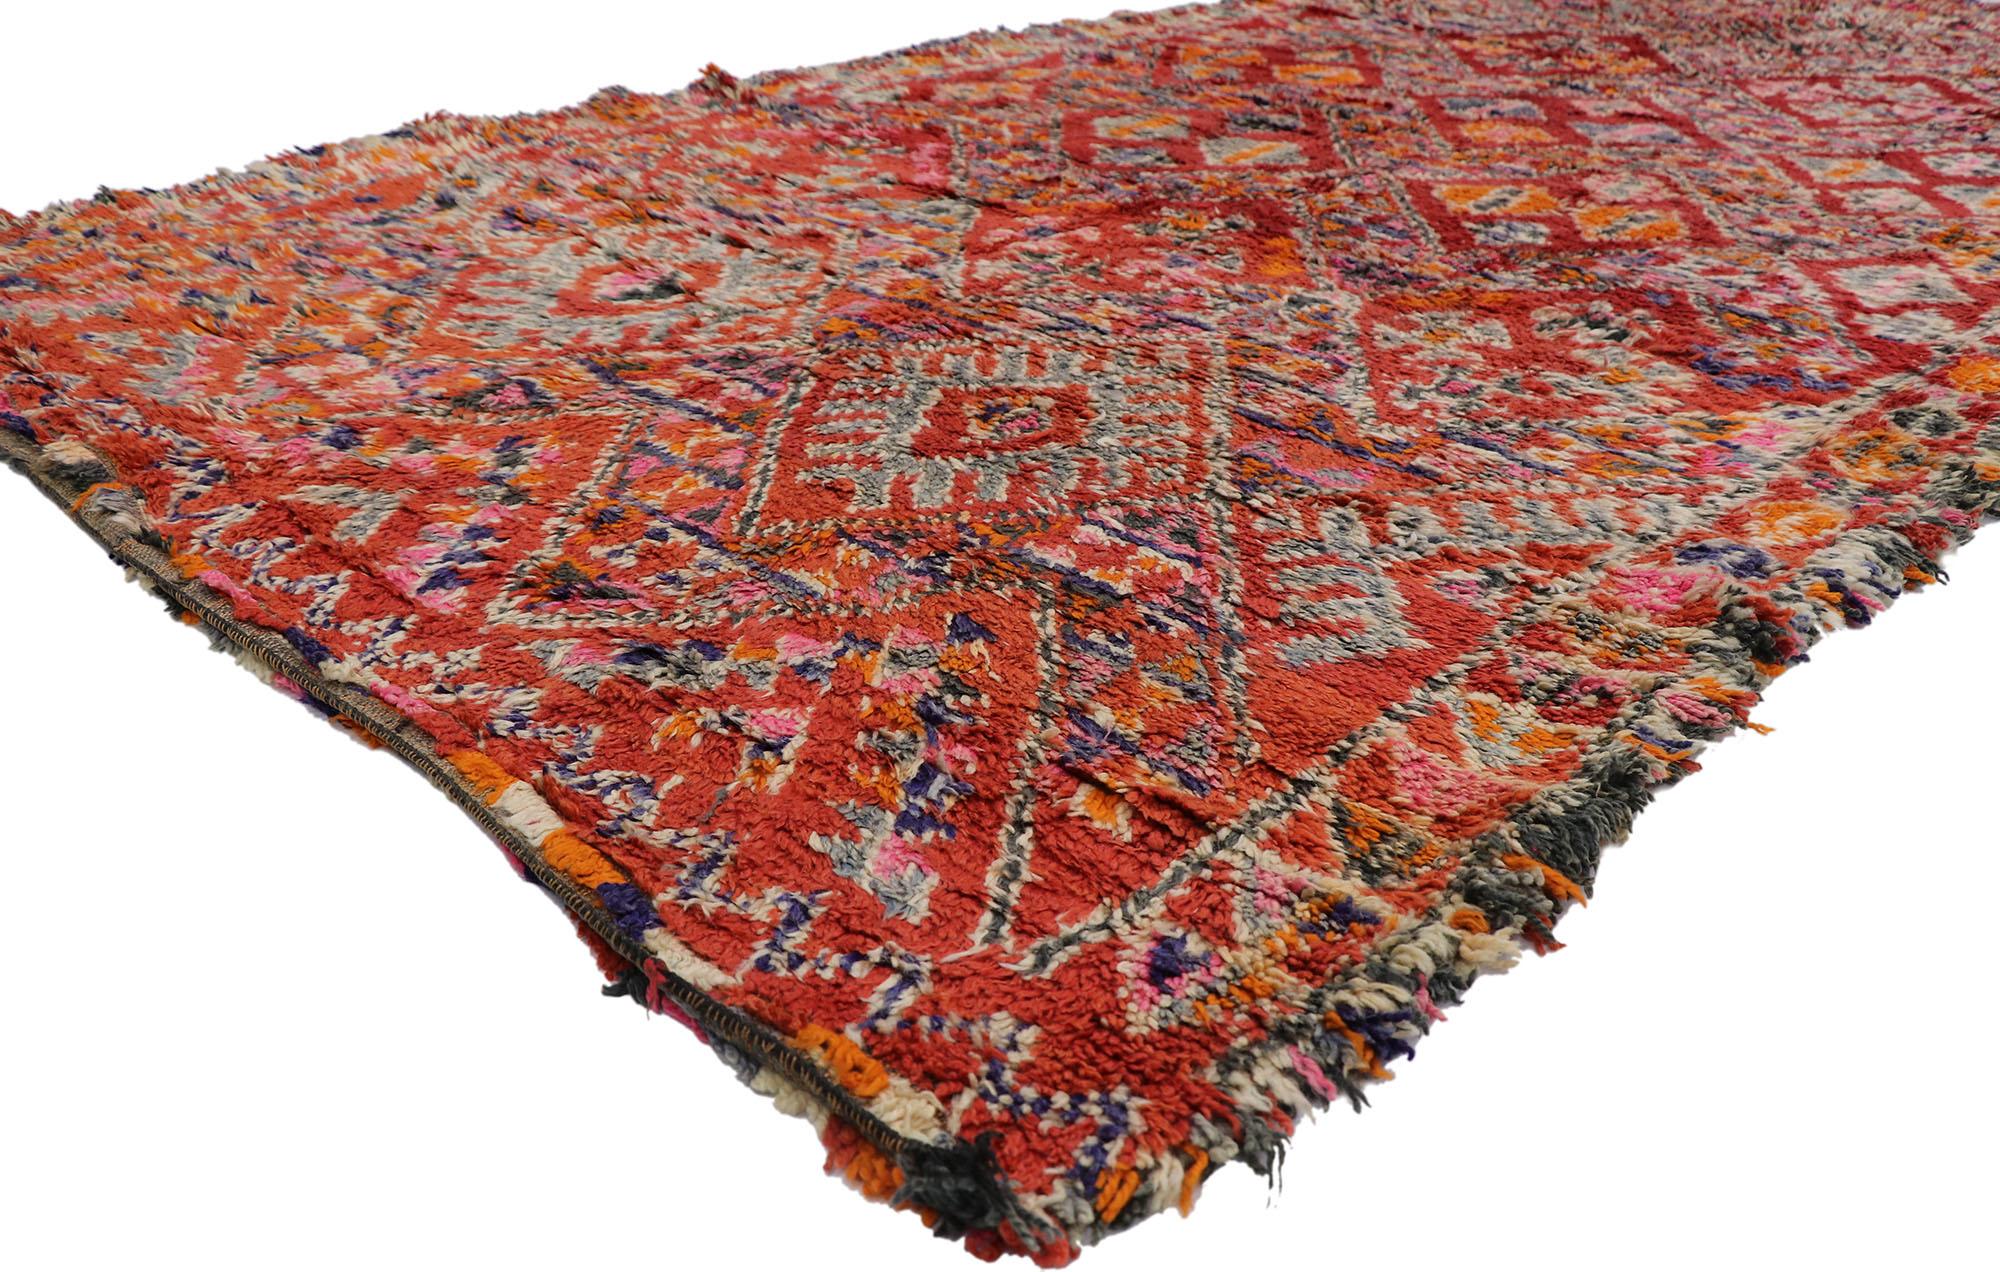 21209 Vintage Berber Beni M'Guild Moroccan rug with Boho Chic Tribal Style 06'04 x 12'04. Showcasing a bold expressive design, incredible detail and texture, this hand knotted wool vintage Berber Beni M'Guild Moroccan rug is a captivating vision of